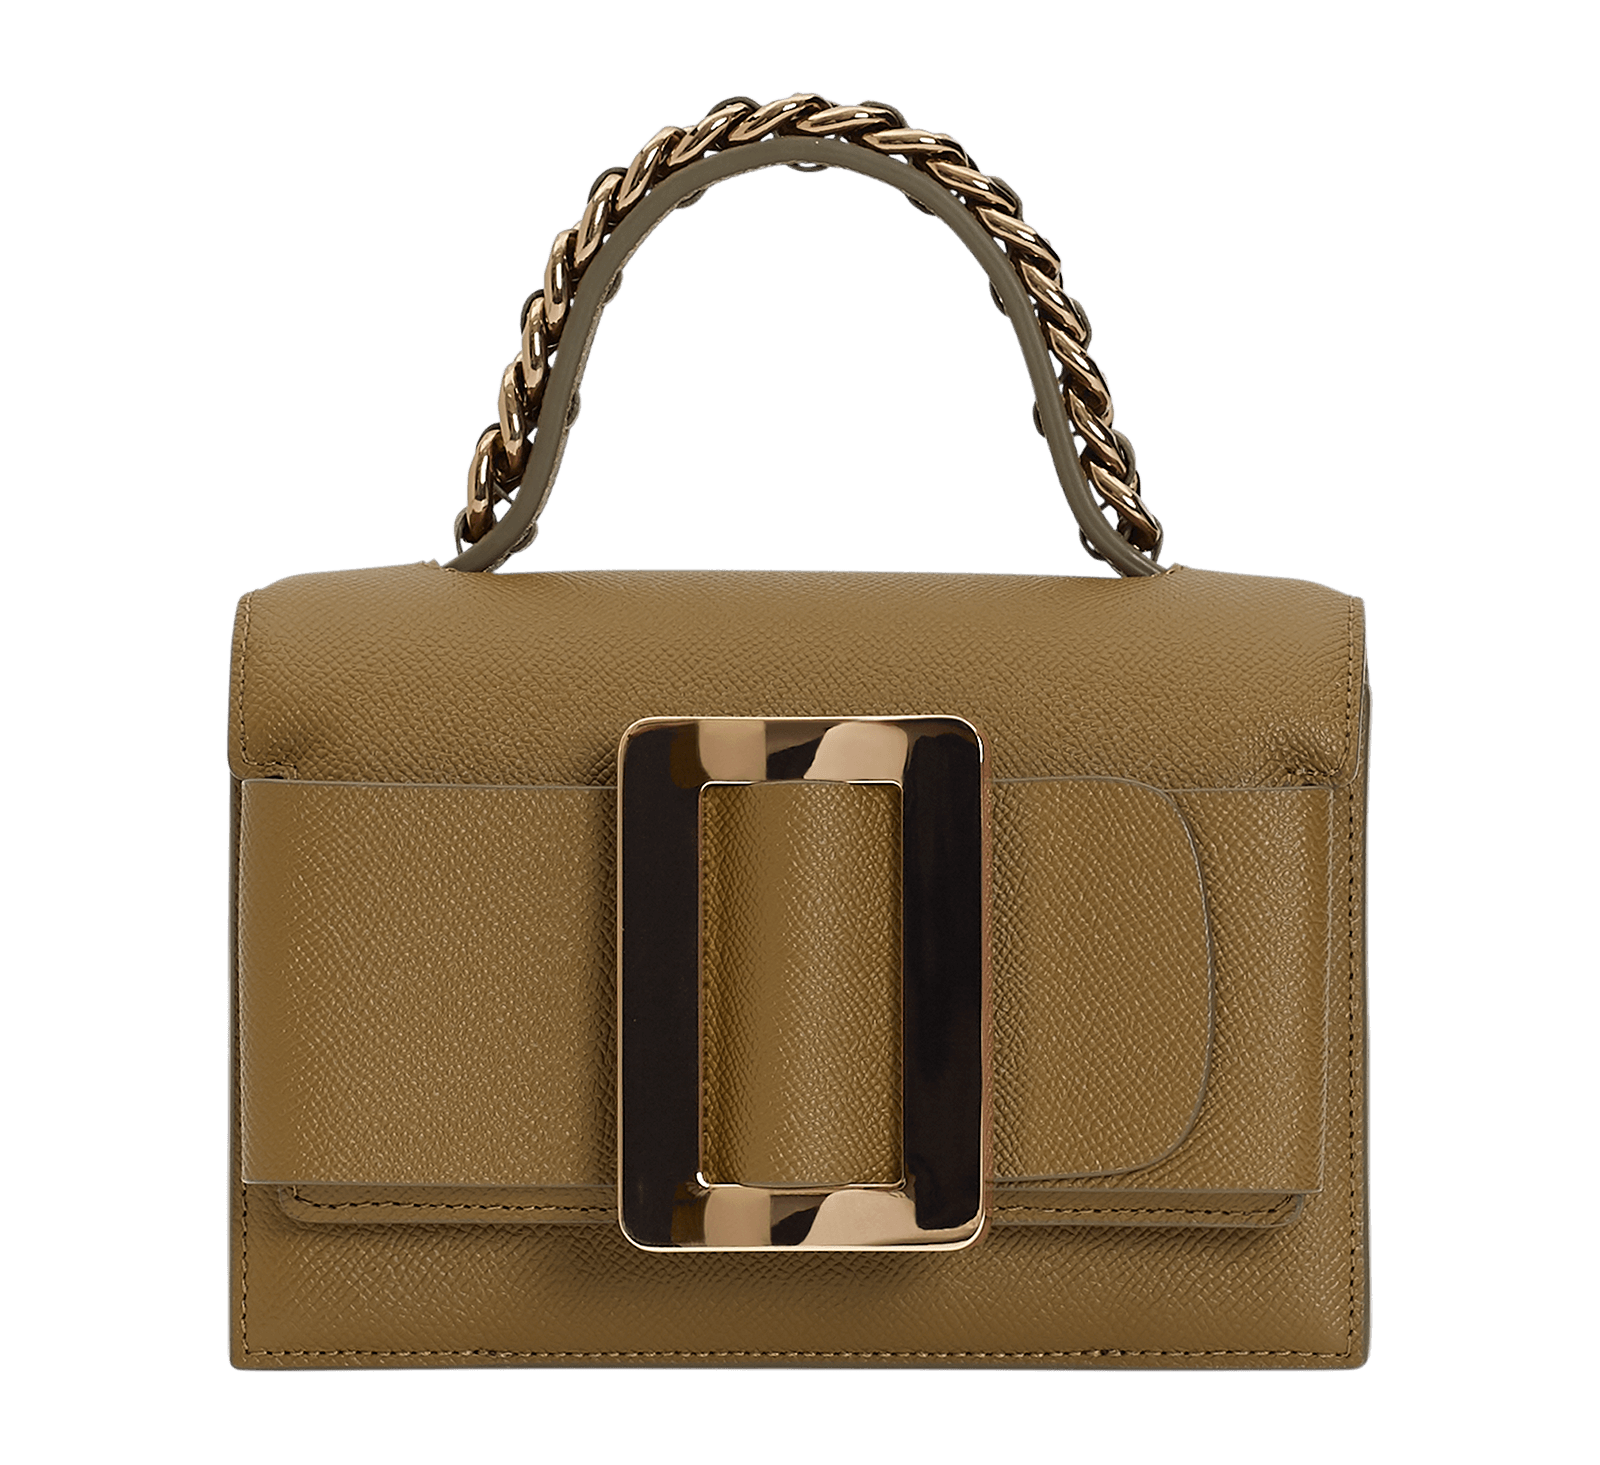 Small brown leather handbag. Features a single carry handle with chain detail, a carry strap, a large gold buckle and front flap closure.